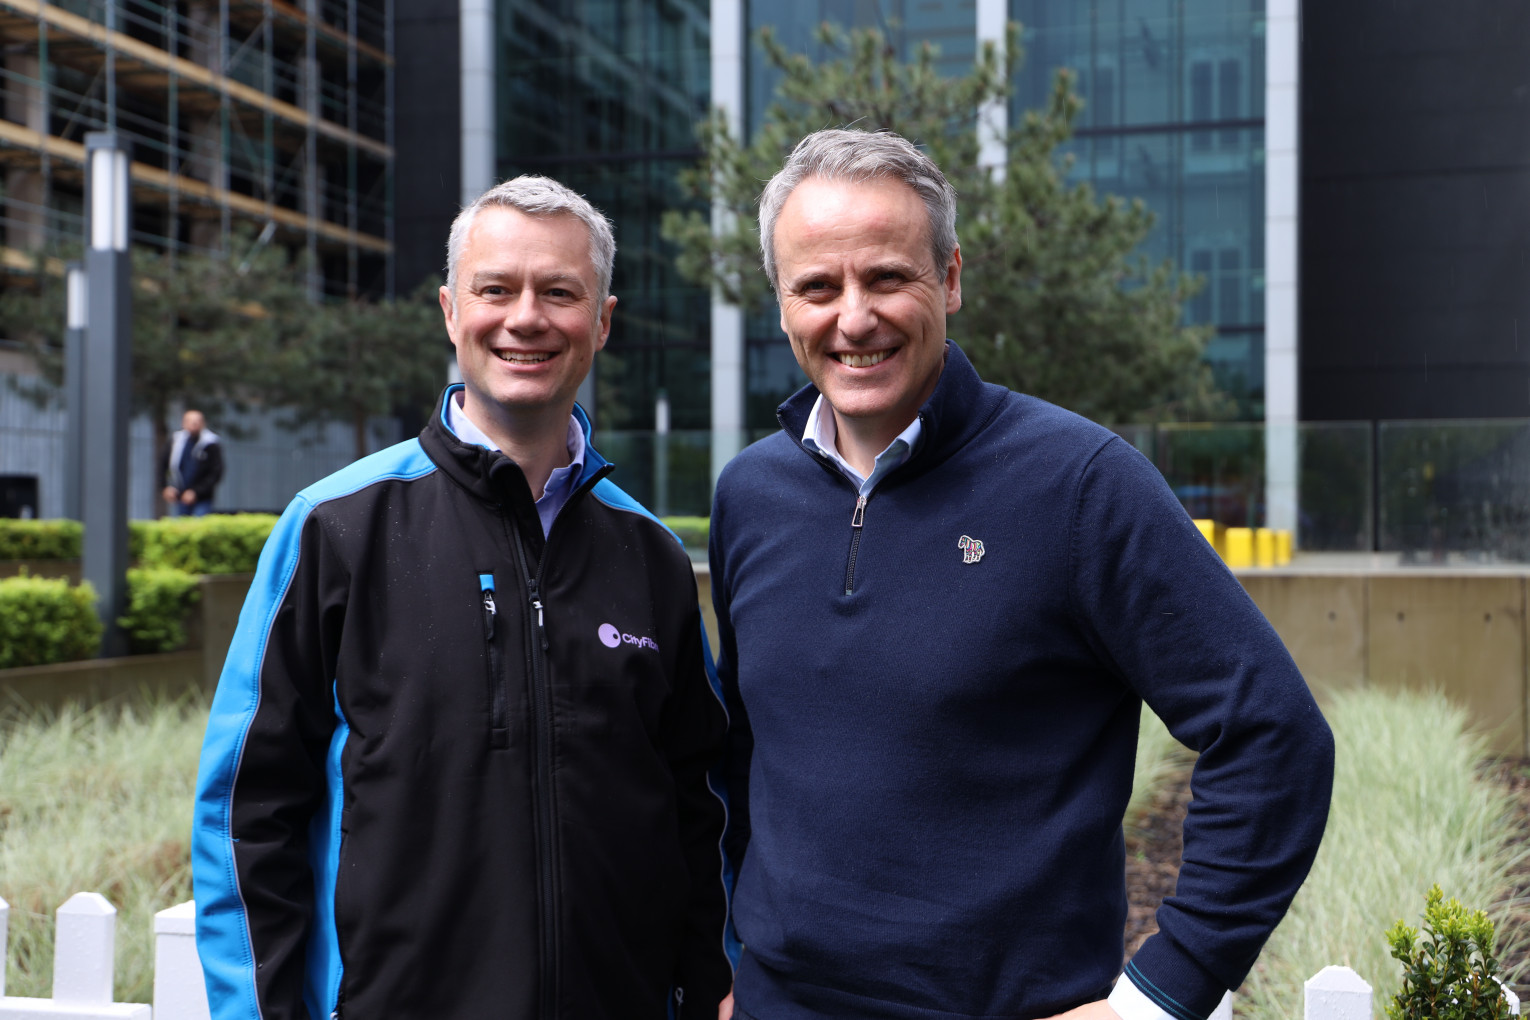 Simon_Holden,_Group_Chief_Operating_Officer_at_CityFibre_and_(right)_Adam_Dunlop,_MD_Direct_and_Supply___Partnerships_at_TalkTalk.JPG